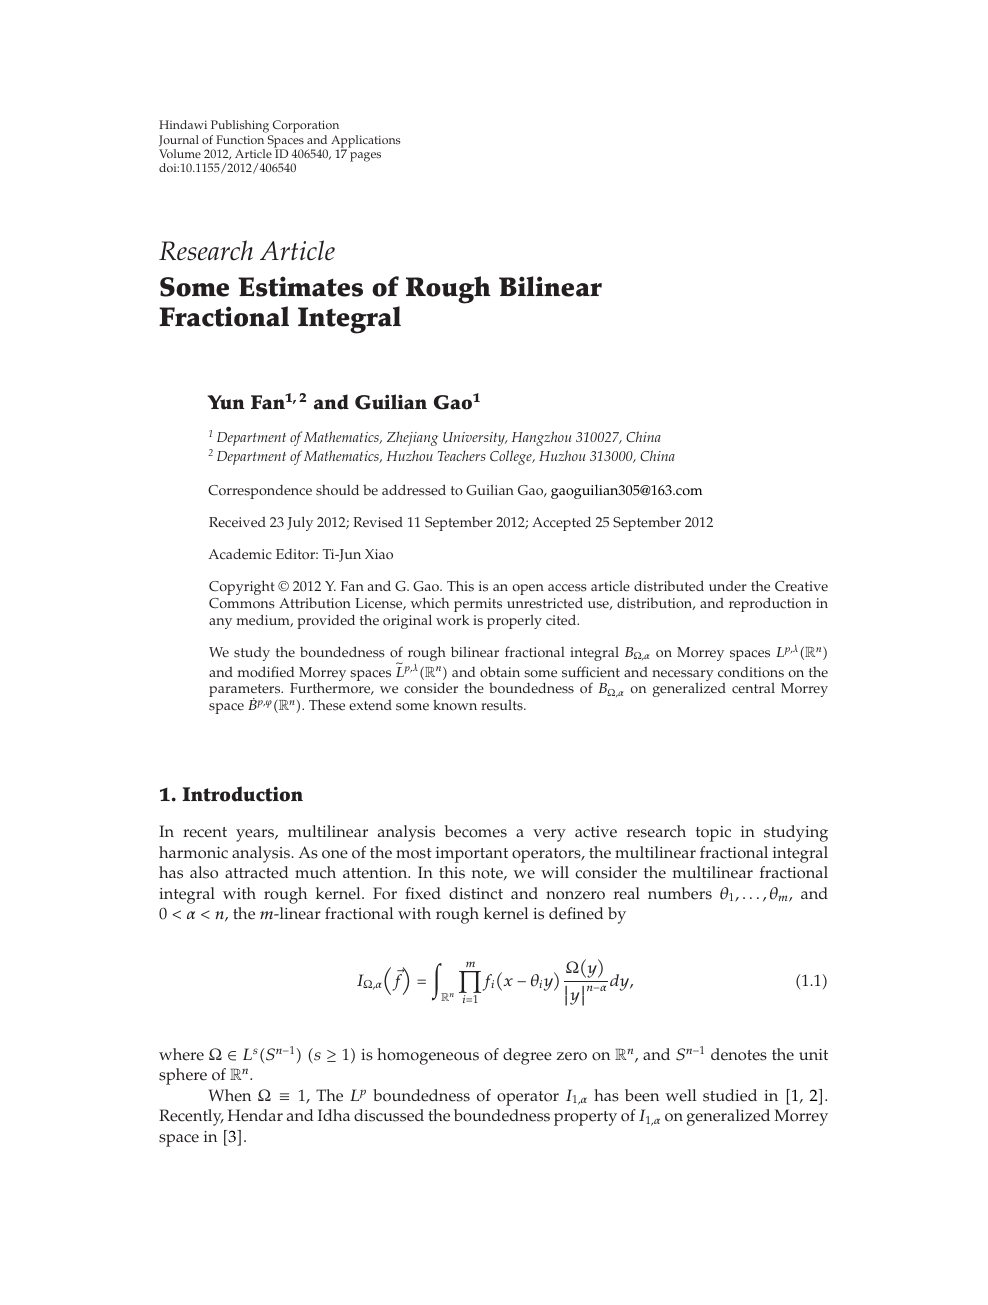 Some Estimates Of Rough Bilinear Fractional Integral Topic Of Research Paper In Mathematics Download Scholarly Article Pdf And Read For Free On Cyberleninka Open Science Hub